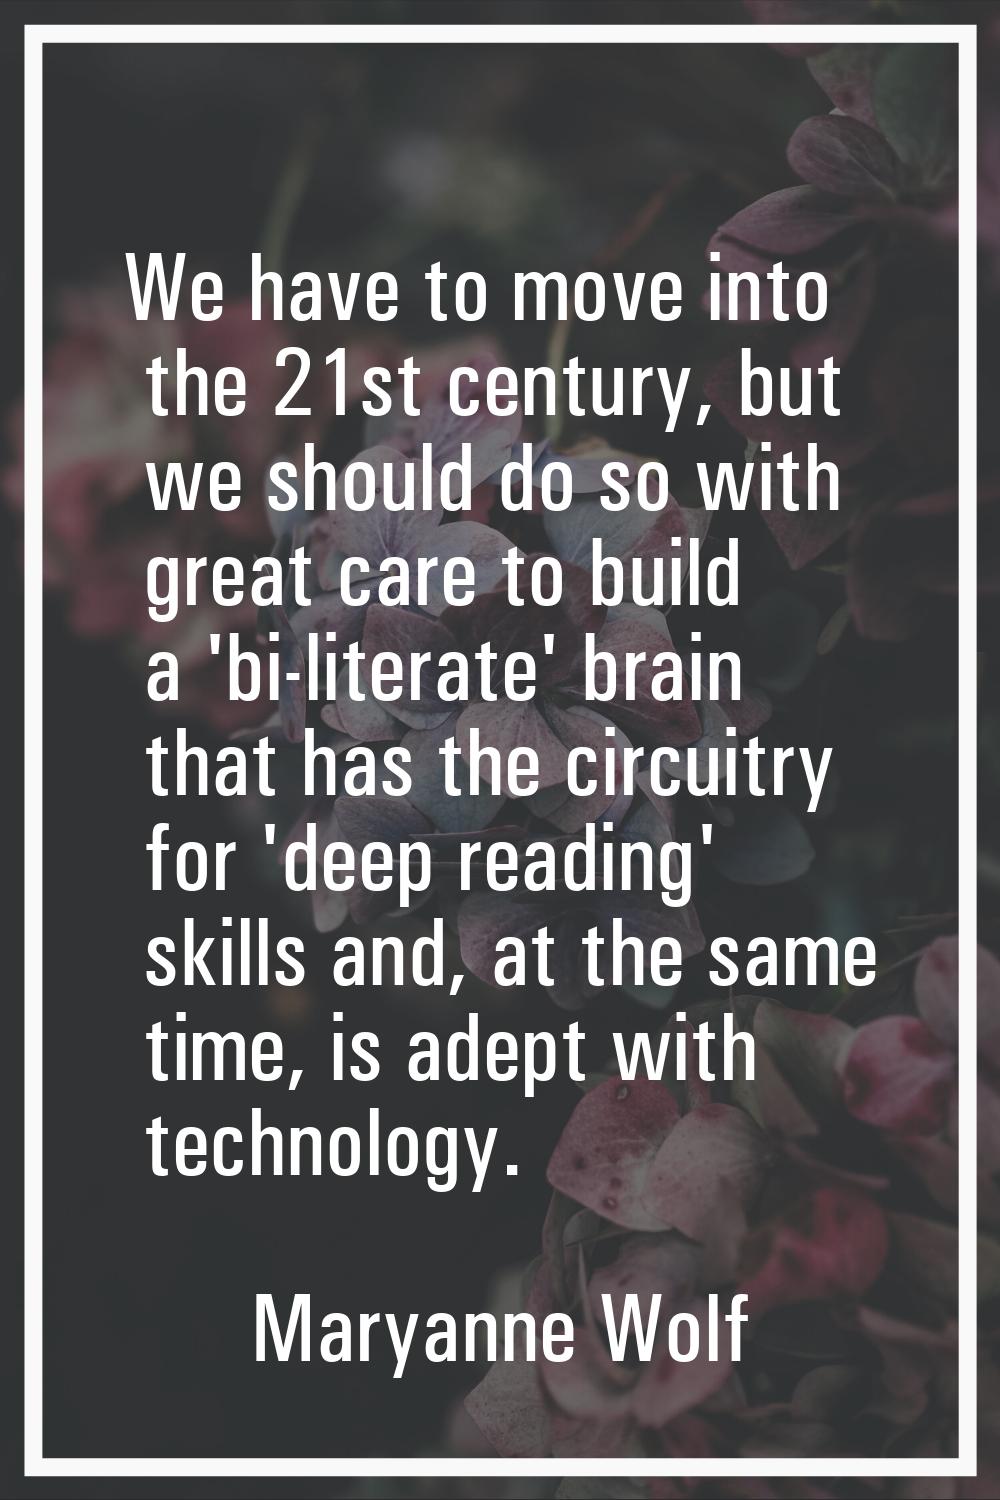 We have to move into the 21st century, but we should do so with great care to build a 'bi-literate'